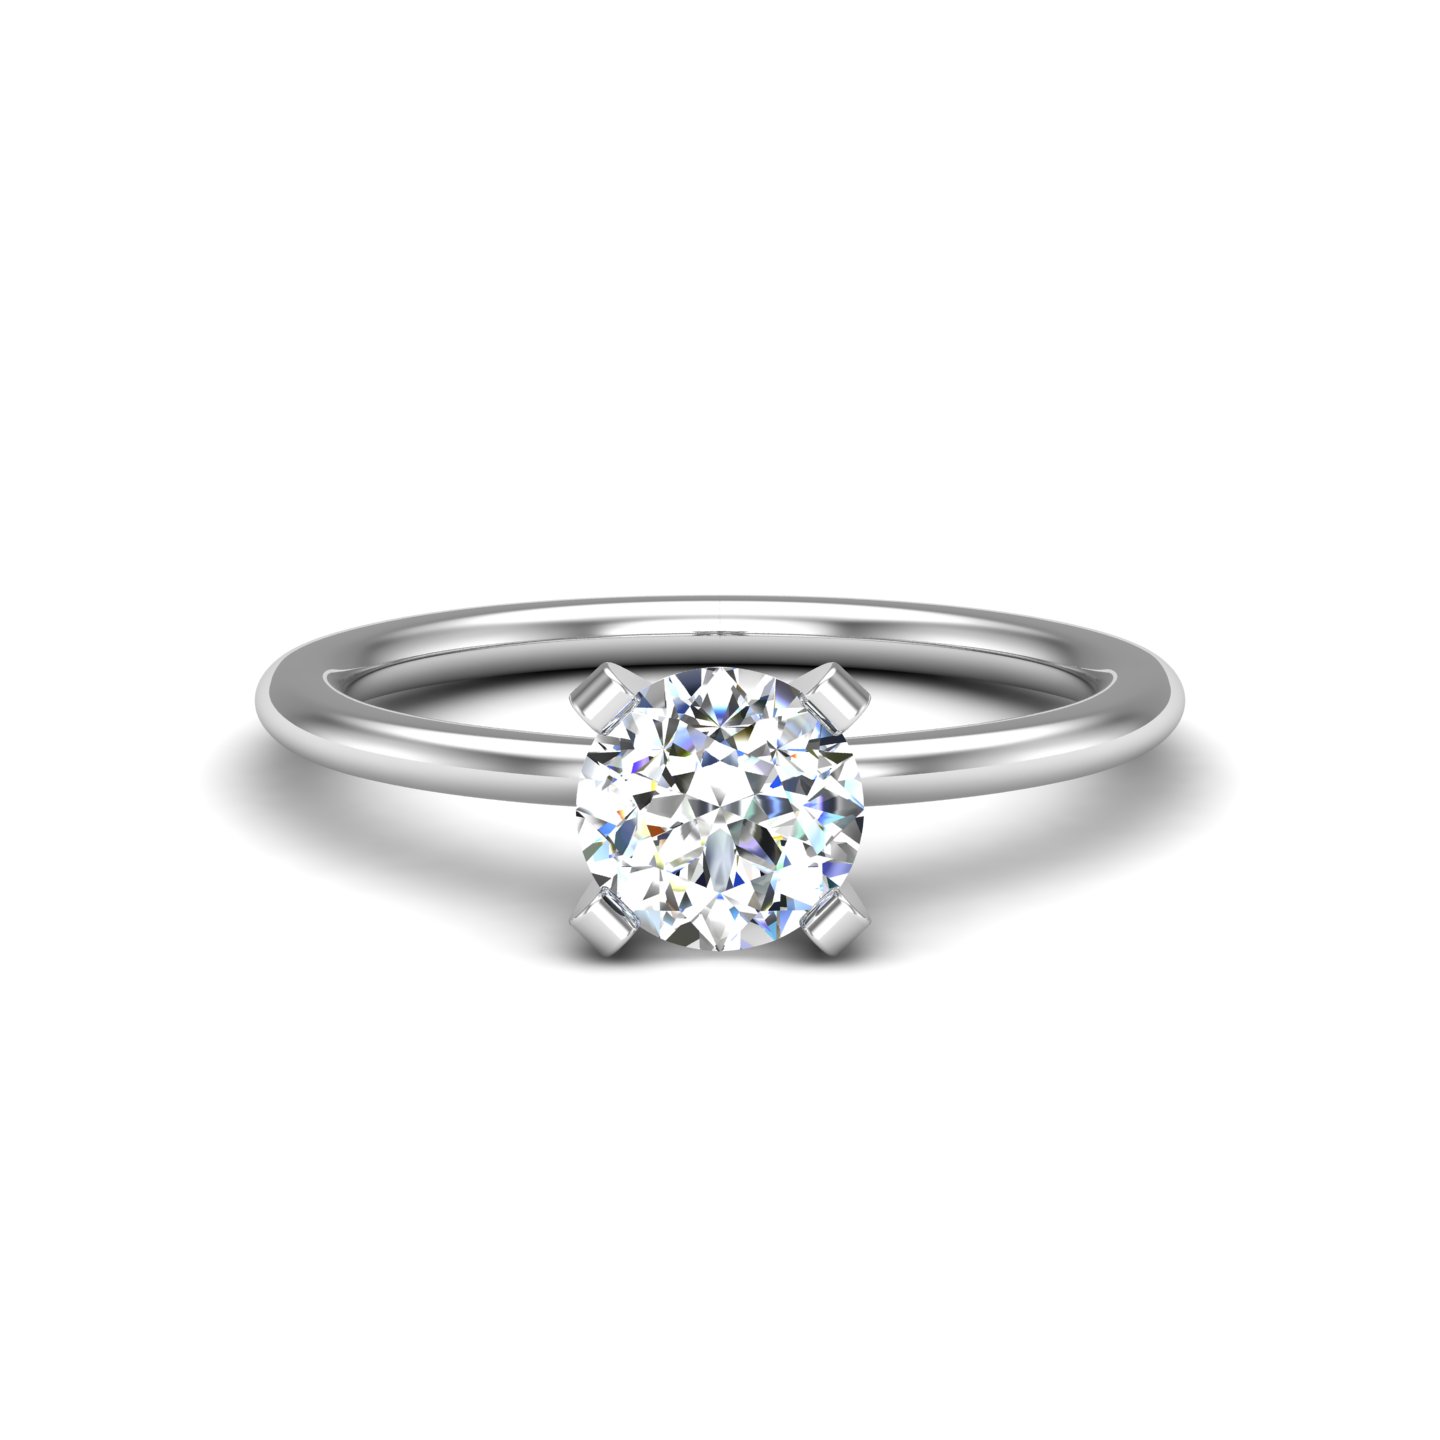 Korman Signature Kinley 4 Prong Solitaire Semi Mount Engagement Ring